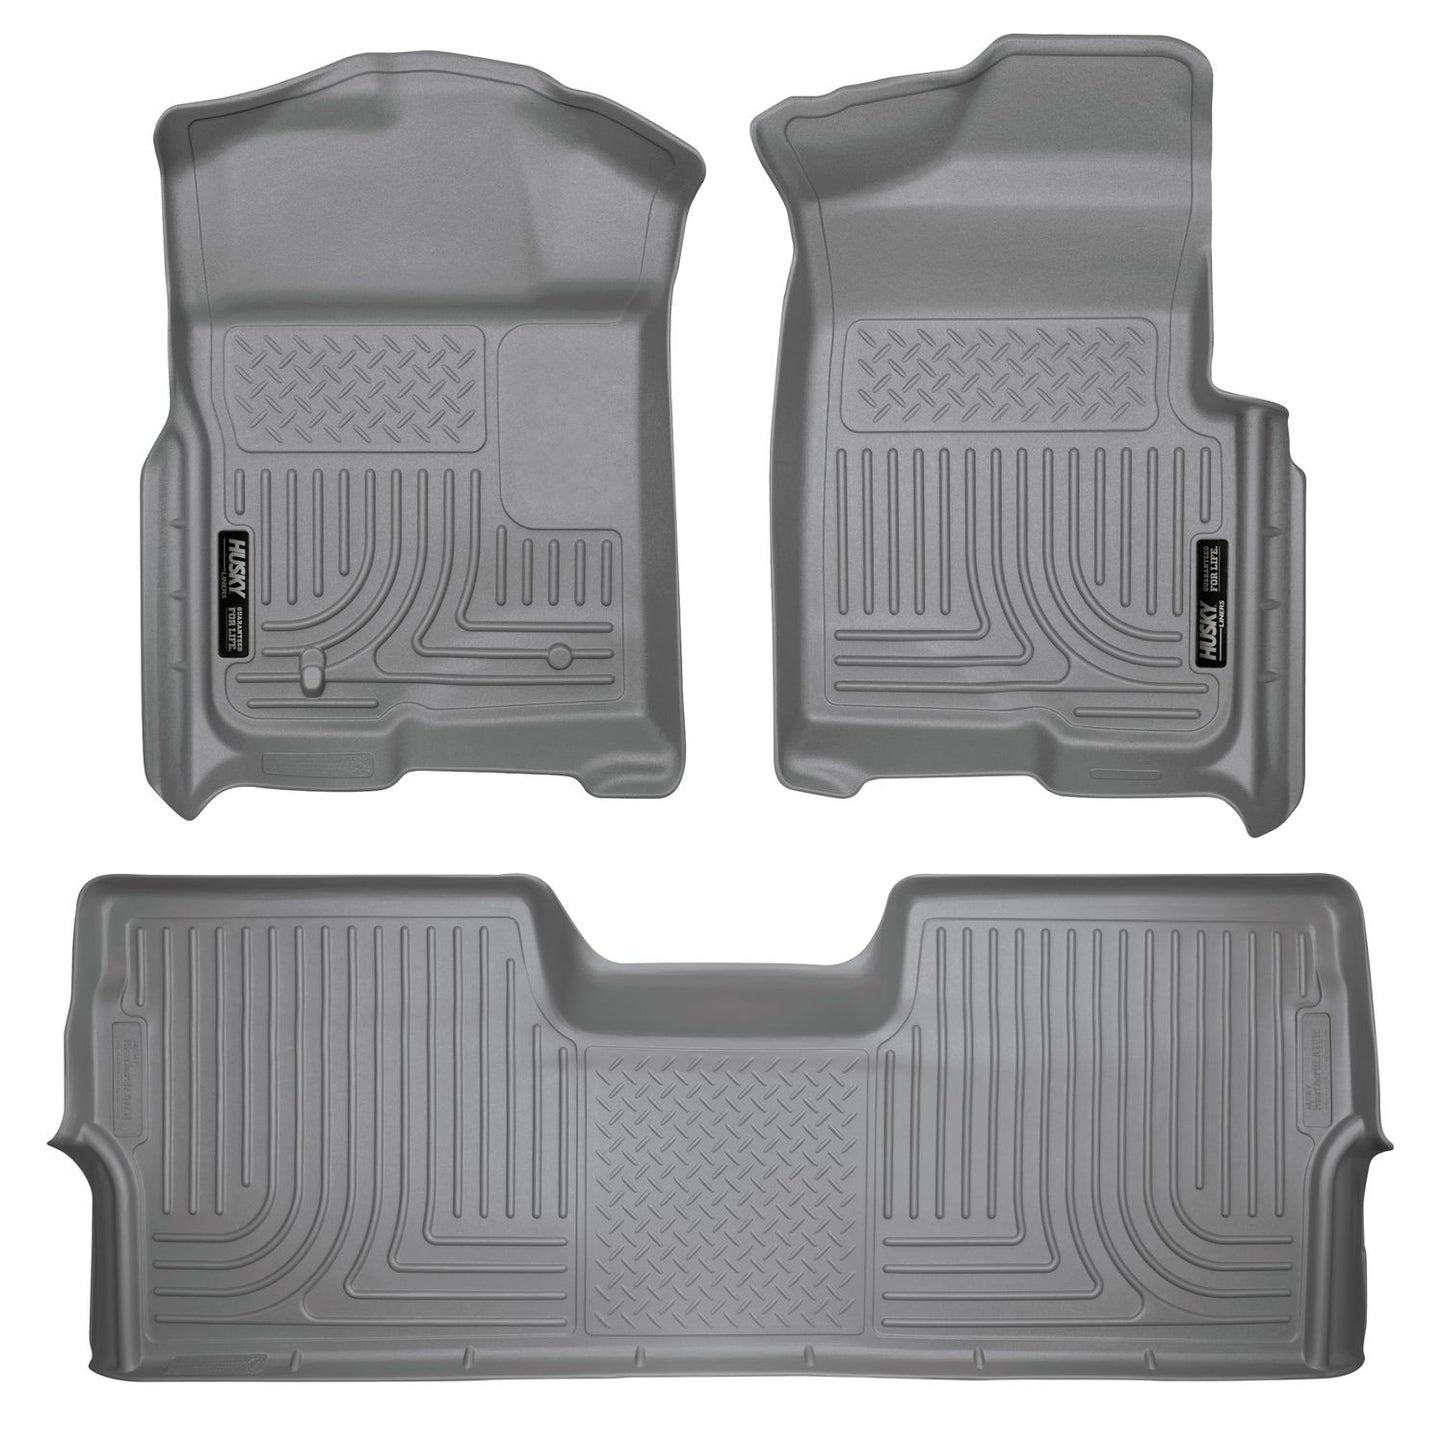 Husky Liners Front & 2nd Seat Floor Liners (Footwell Coverage) 98332